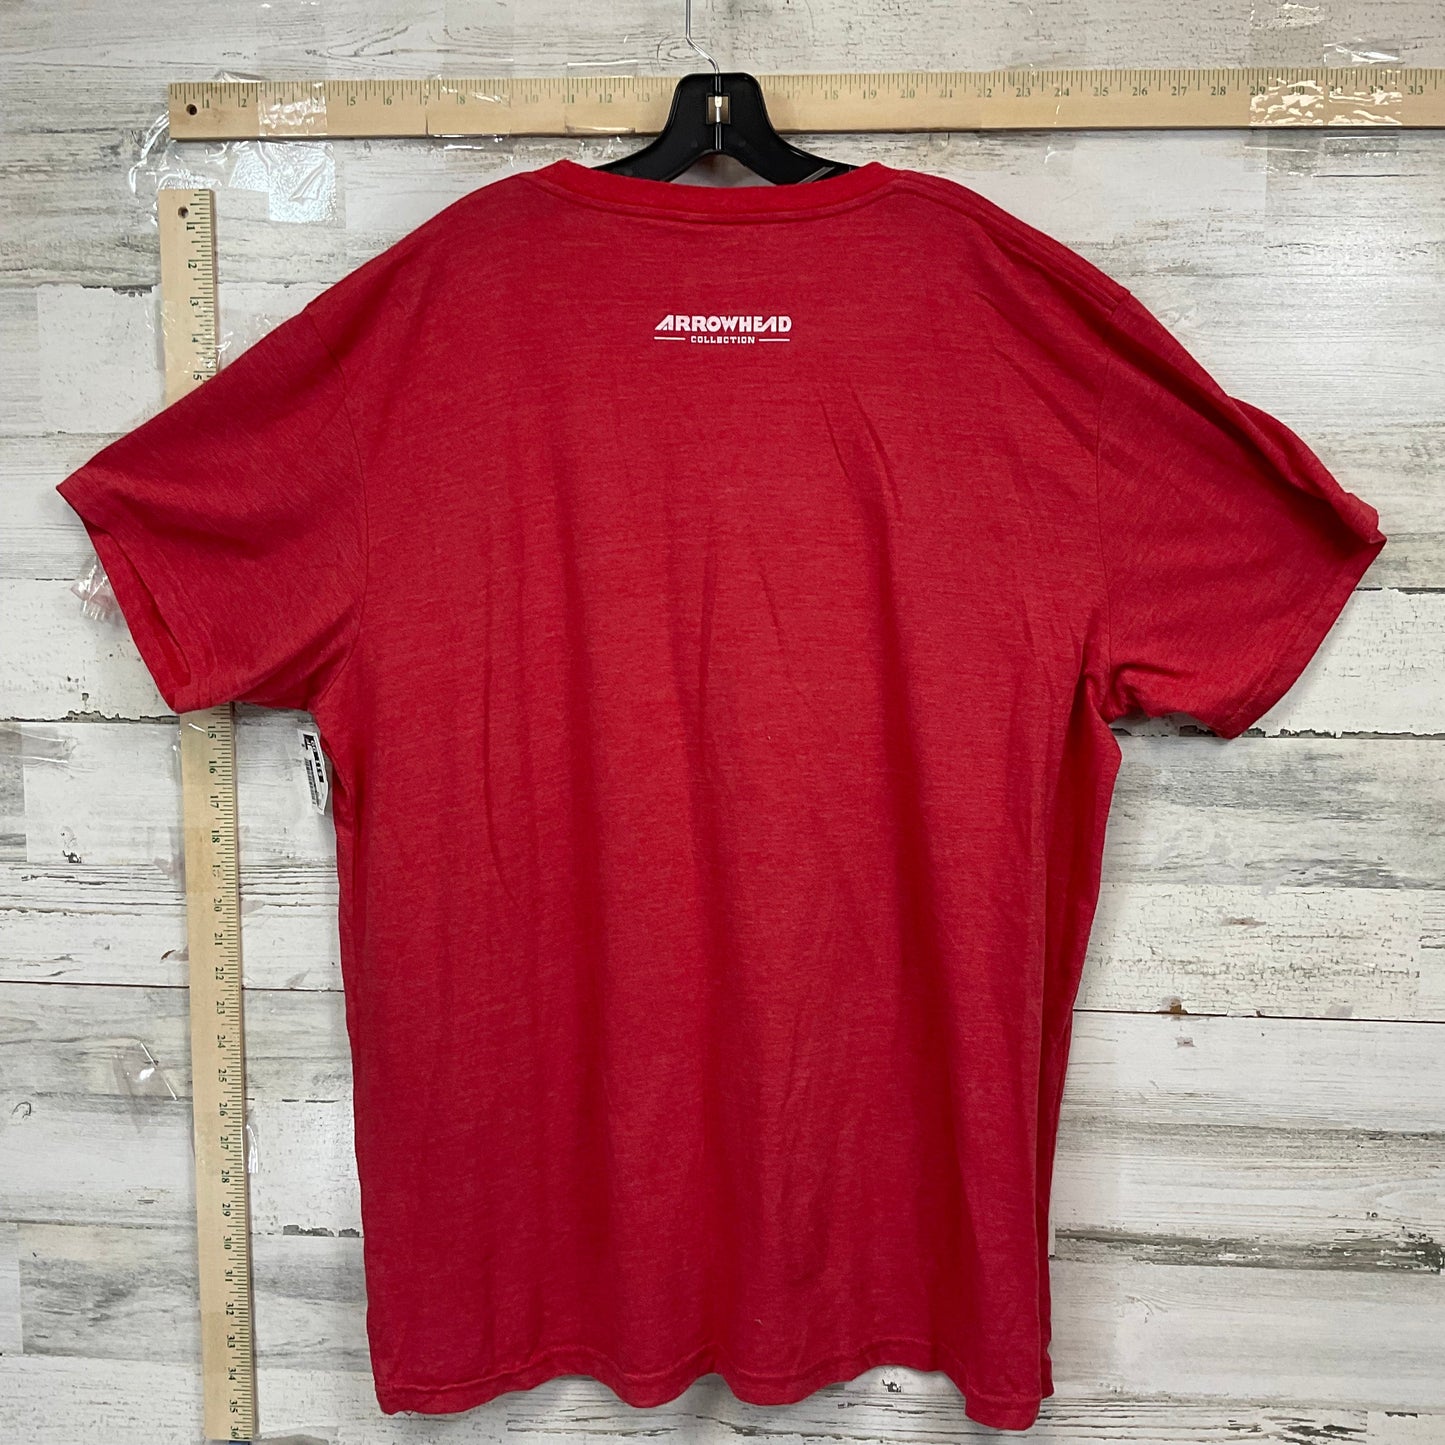 Red Top Short Sleeve Charlie Hustle, Size 3x